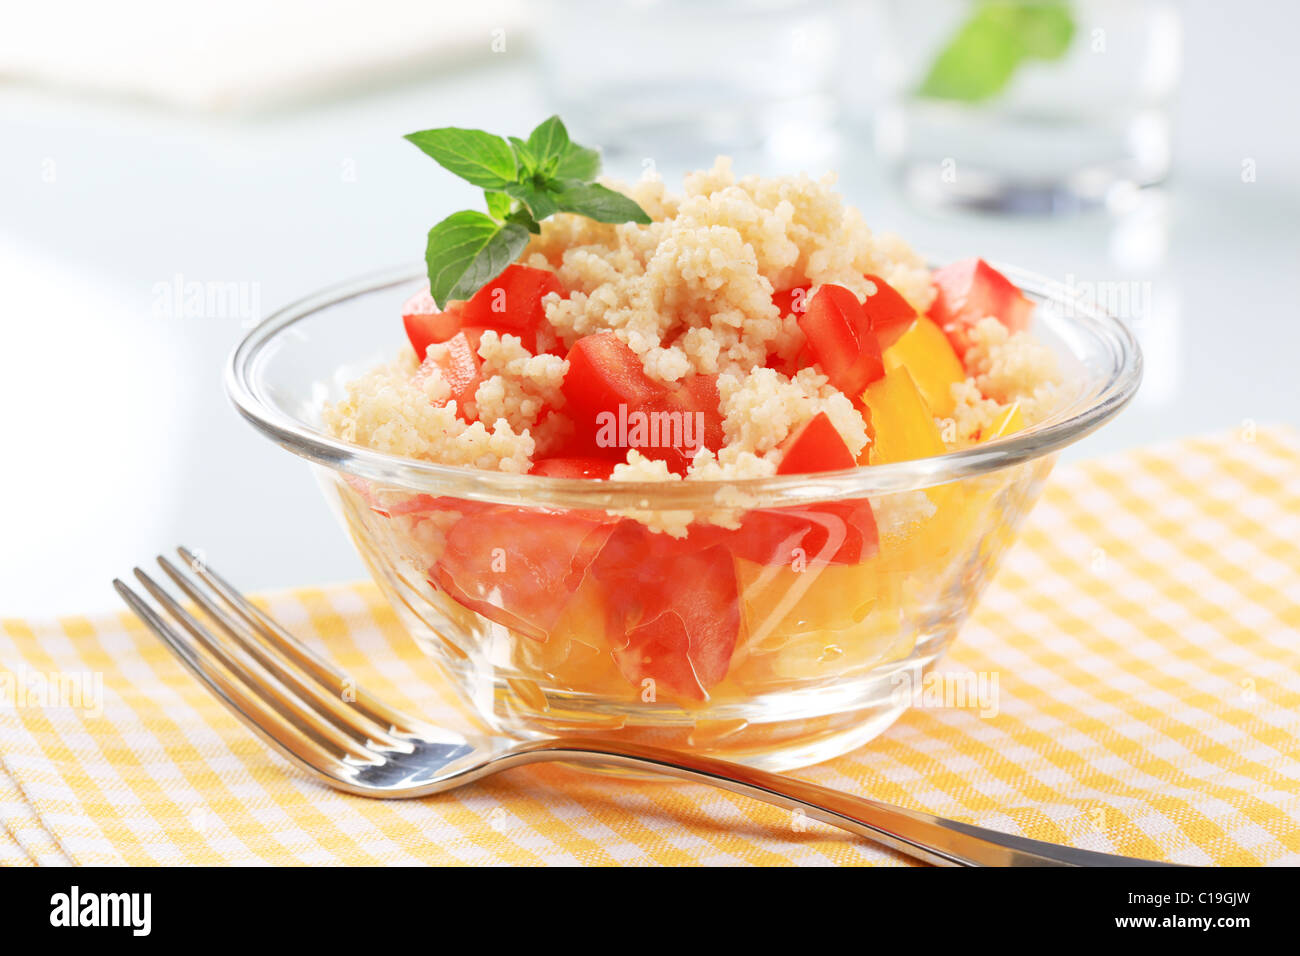 Bowl of fresh couscous salad and fork Stock Photo